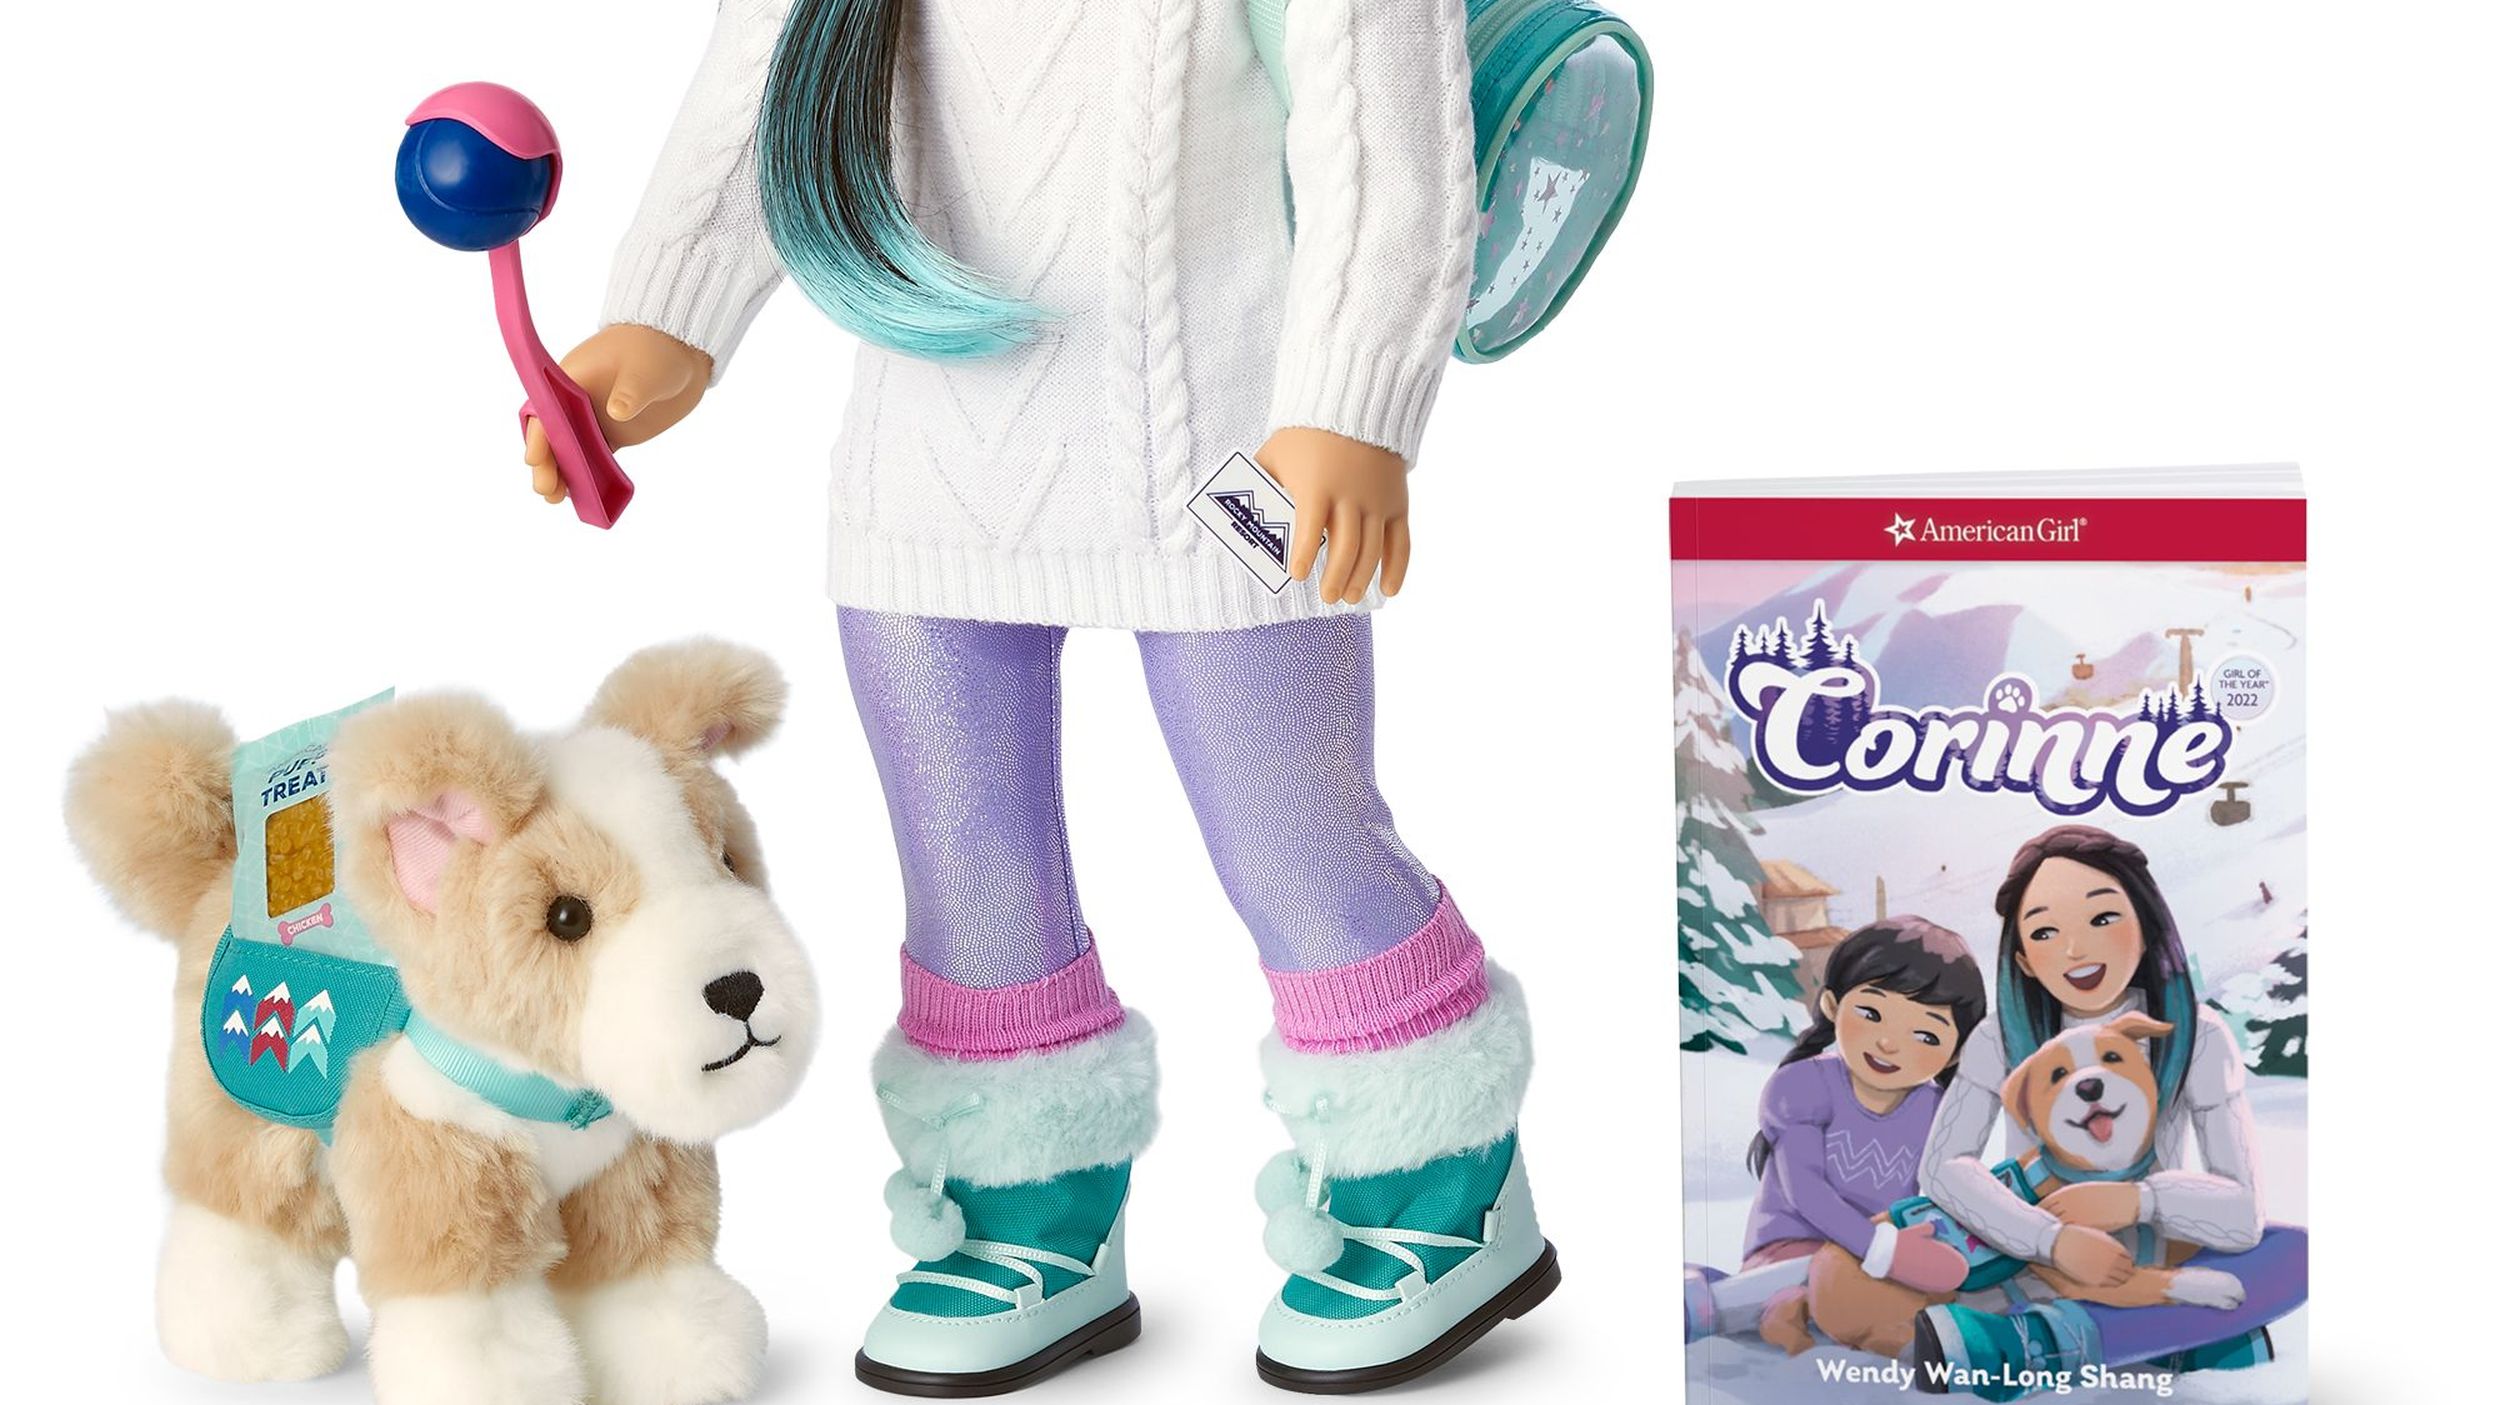 Meet Corinne Tan, American Girl's new – and only – Chinese American doll